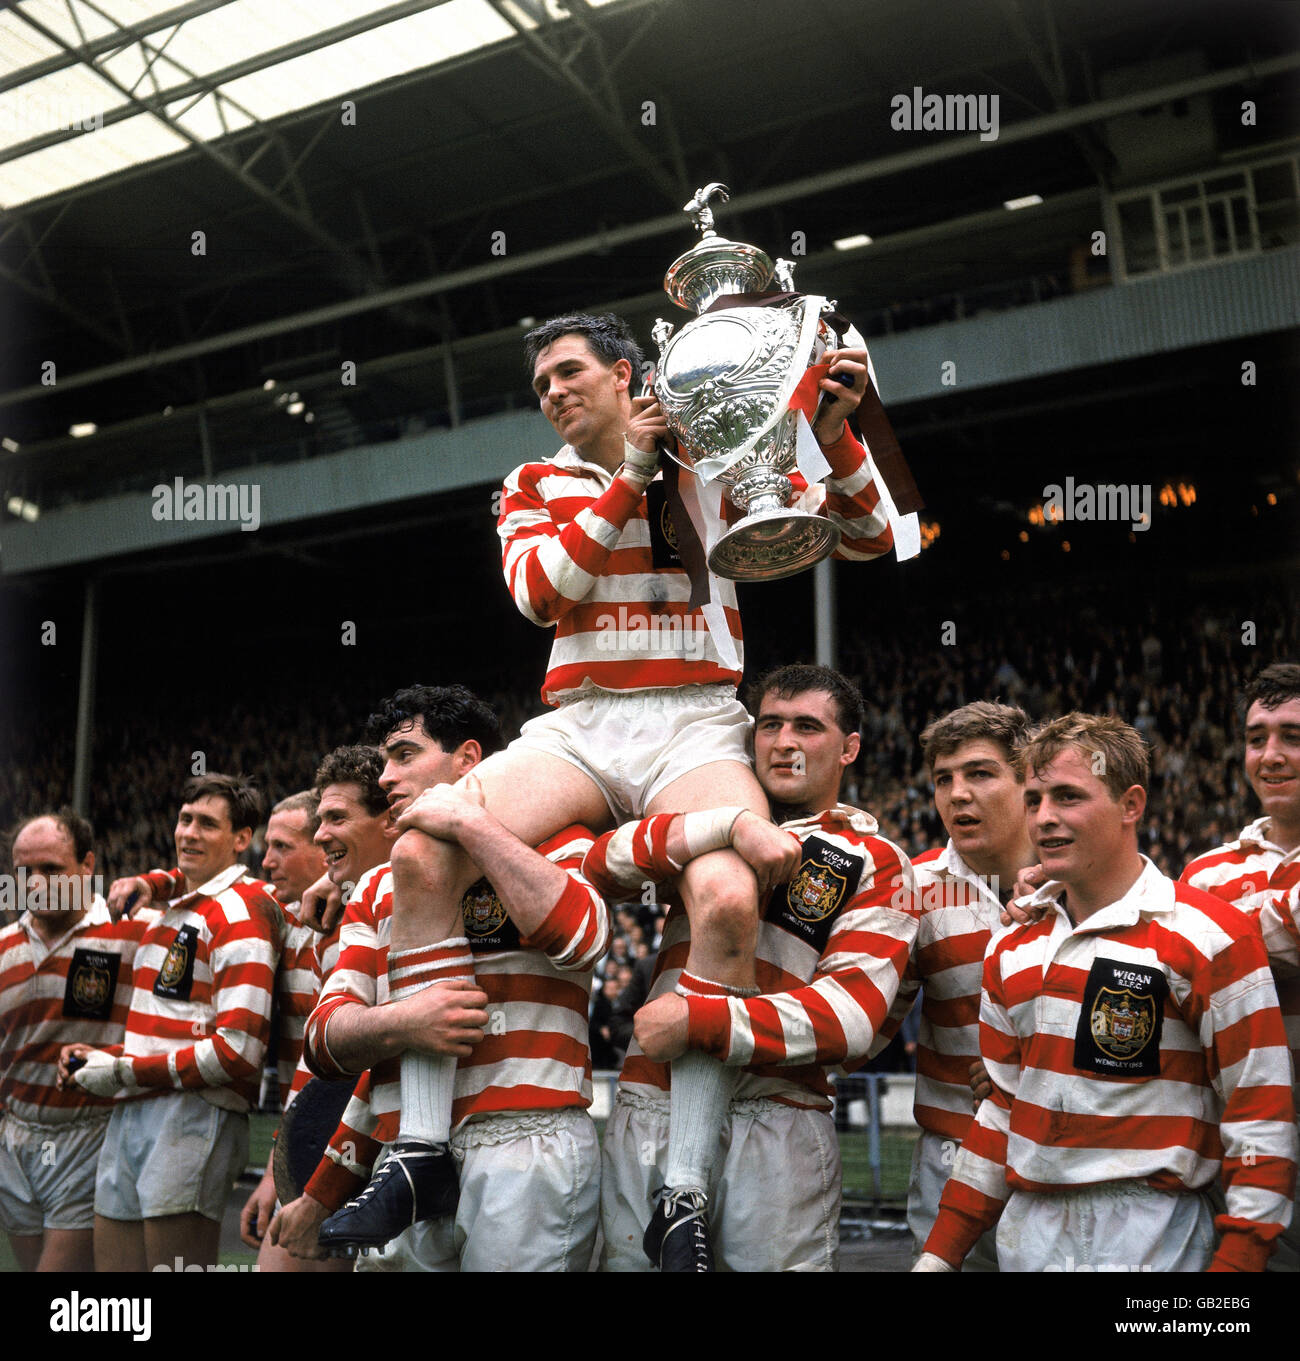 Rugby League - Challenge Cup - Final - Wigan v Hunslet - Wembley. Wigan captain Eric Ashton shows off the Challenge Cup, as he is chaired shoulder-high by his triumphant teammates. Stock Photo